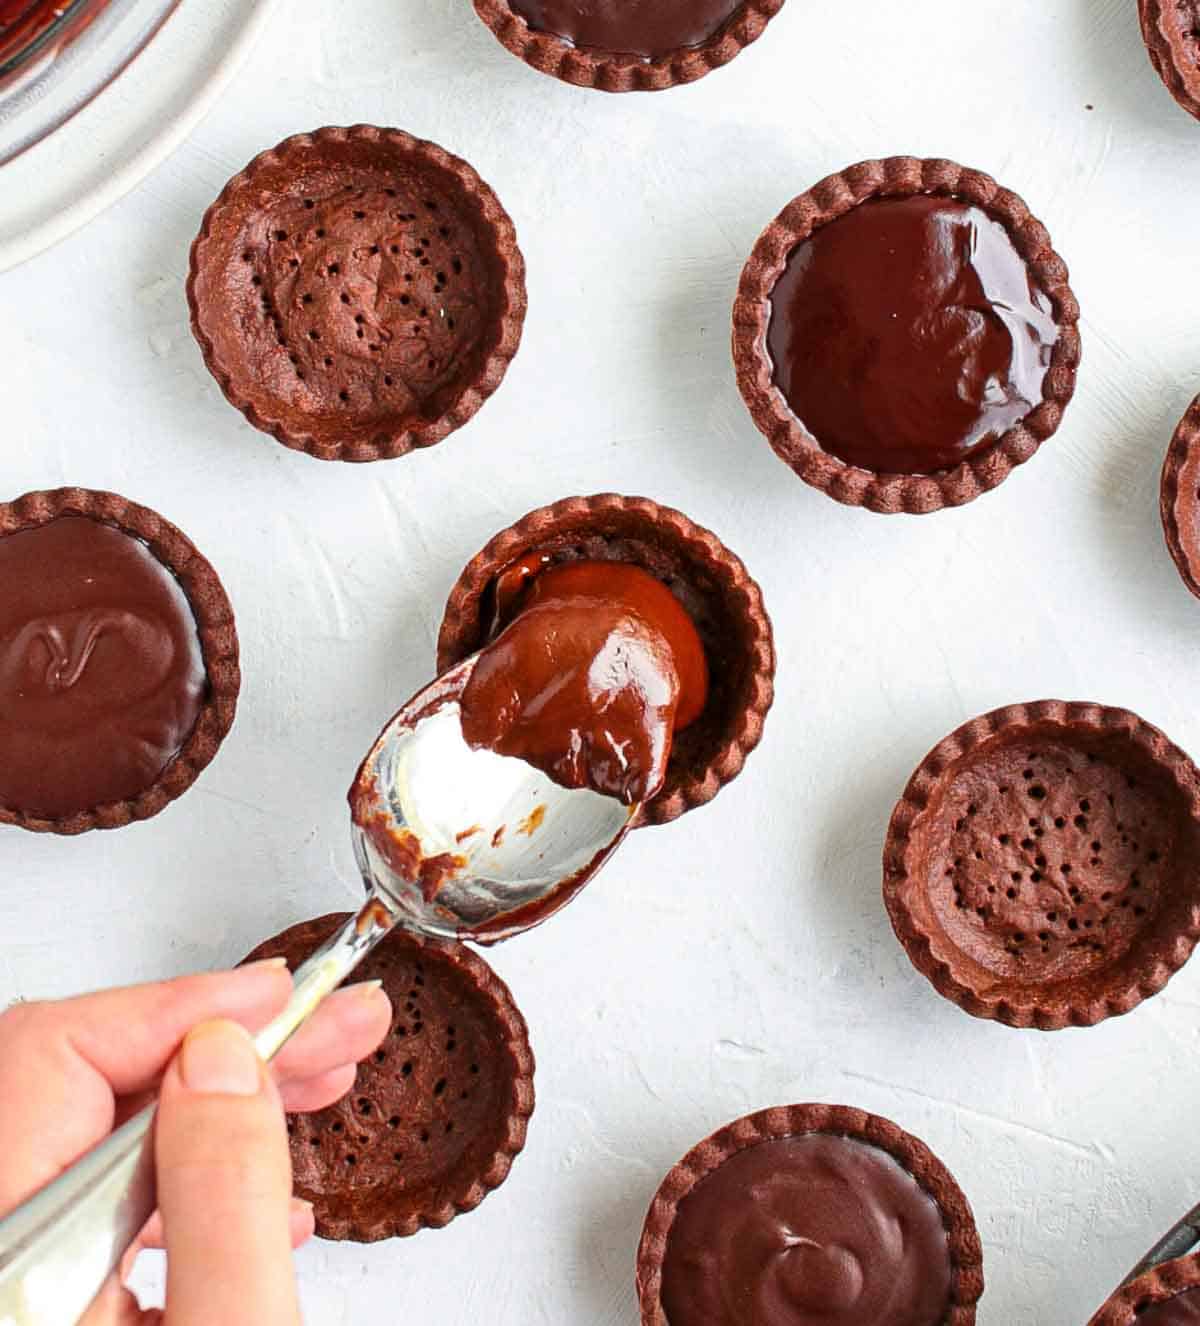 Pouring the chocolate ganache inside the tartlet shells.